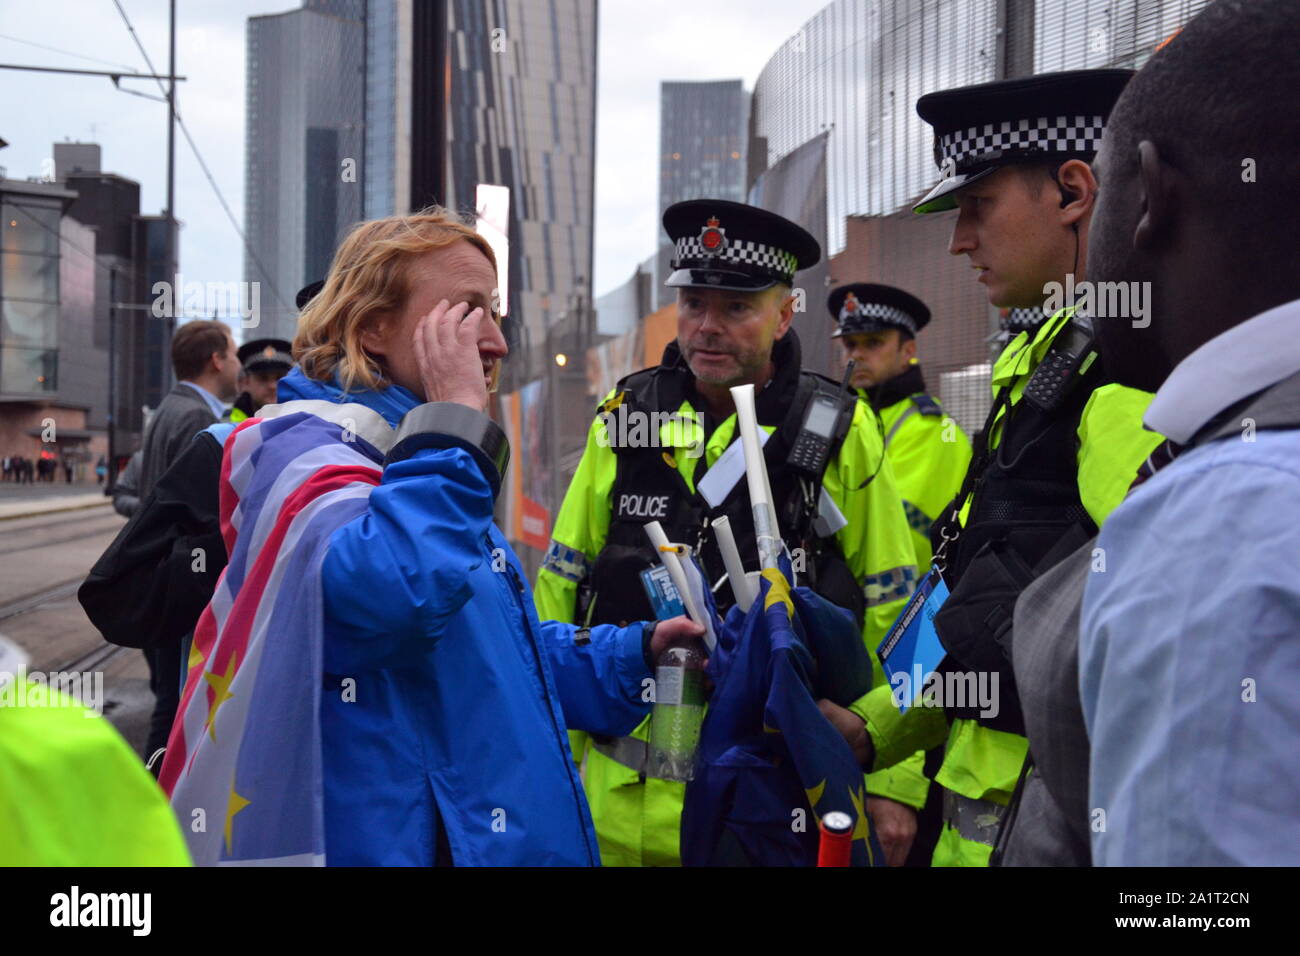 An altercation took place near the main gate of the Conservative Party Conference, 2019, in Manchester, uk, as the conference prepares to start. A member of the Stand of Defiance European Movement, wearing a union jack flag, talks to police after EU flags belonging to the group were allegedly stolen and damaged. The conference prepares to start with a heavy police presence and a few demonstrators as the debate about Brexit reaches a climax. Stock Photo